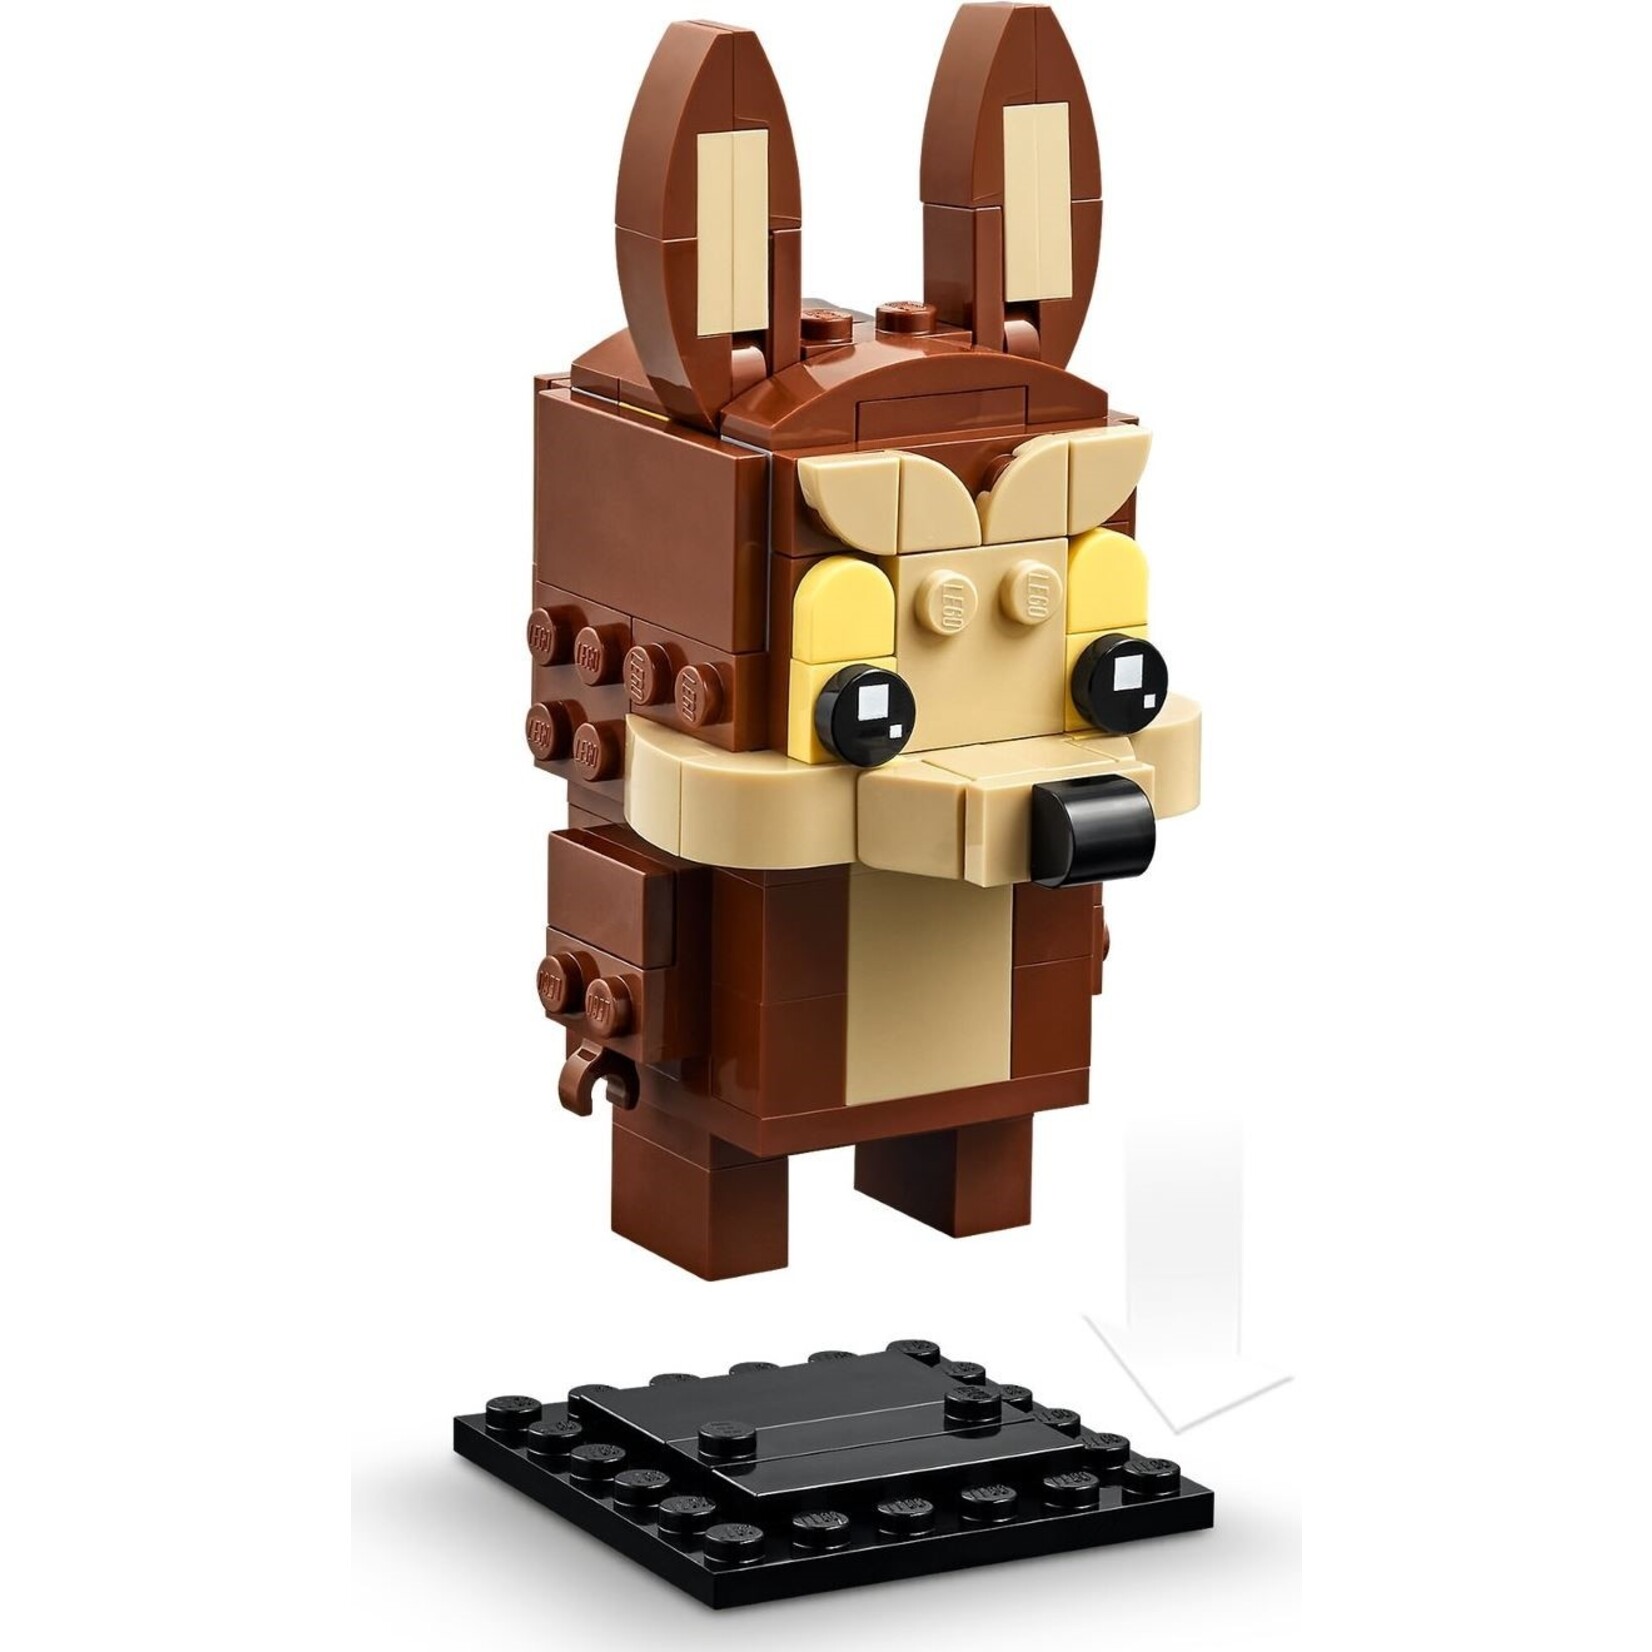 LEGO Road Runner & Wile E. Coyote - 40559